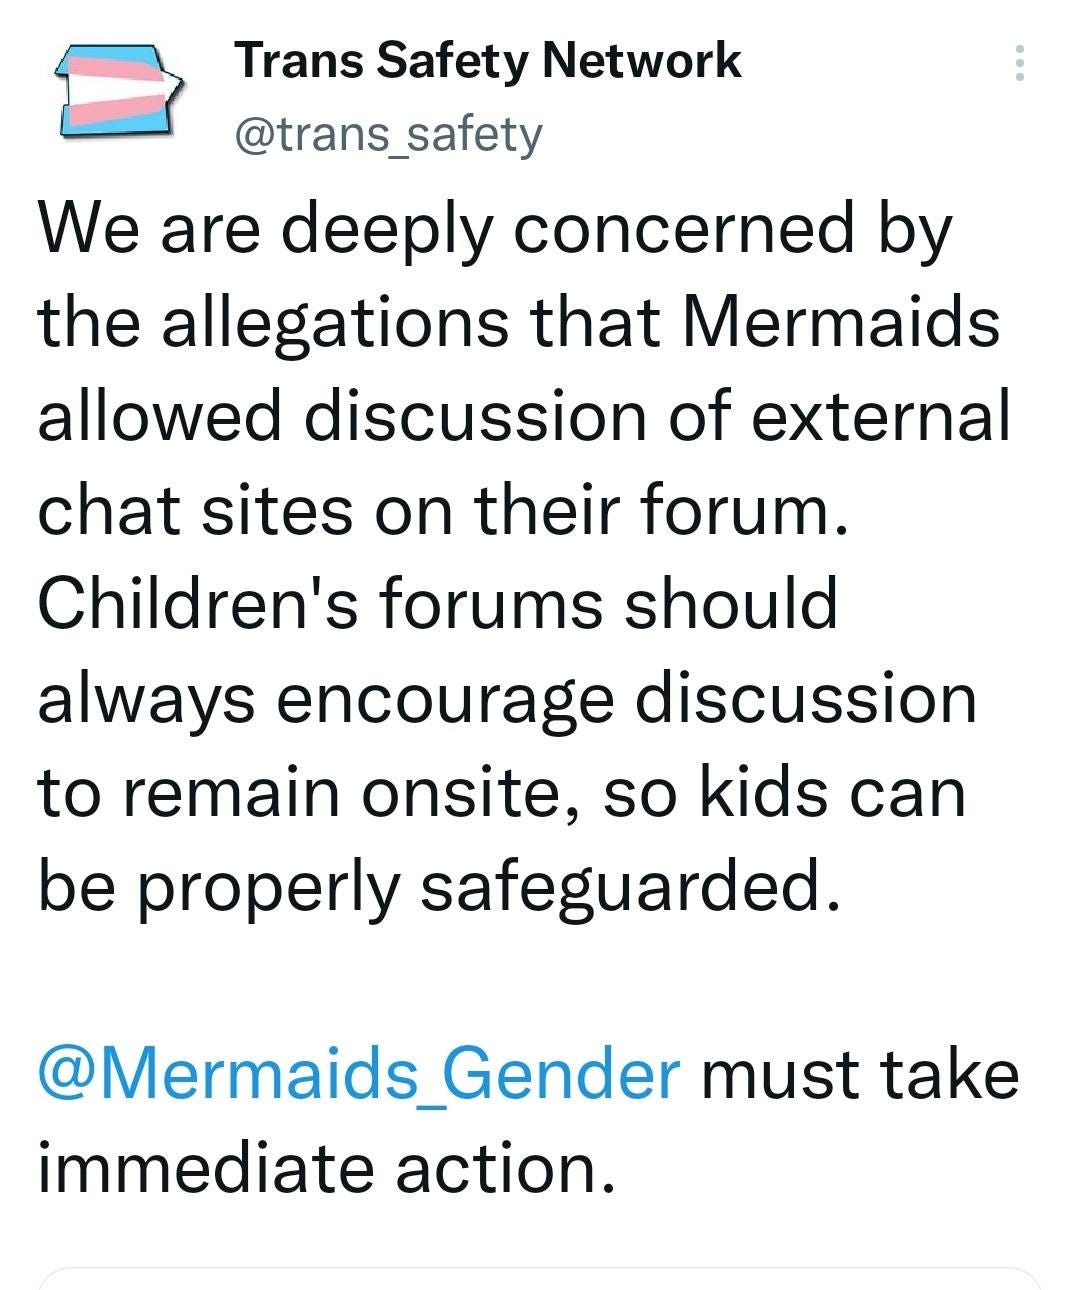 May be a Twitter screenshot of text that says 'Trans Safety Network @trans_safety We are deeply concerned by the allegations that Mermaids allowed discussion of external chat sites on their forum. Children's forums should always encourage discussion to remain onsite, so kids can be properly safeguarded. @Mermaids_Gende Gender must take immediate action.'